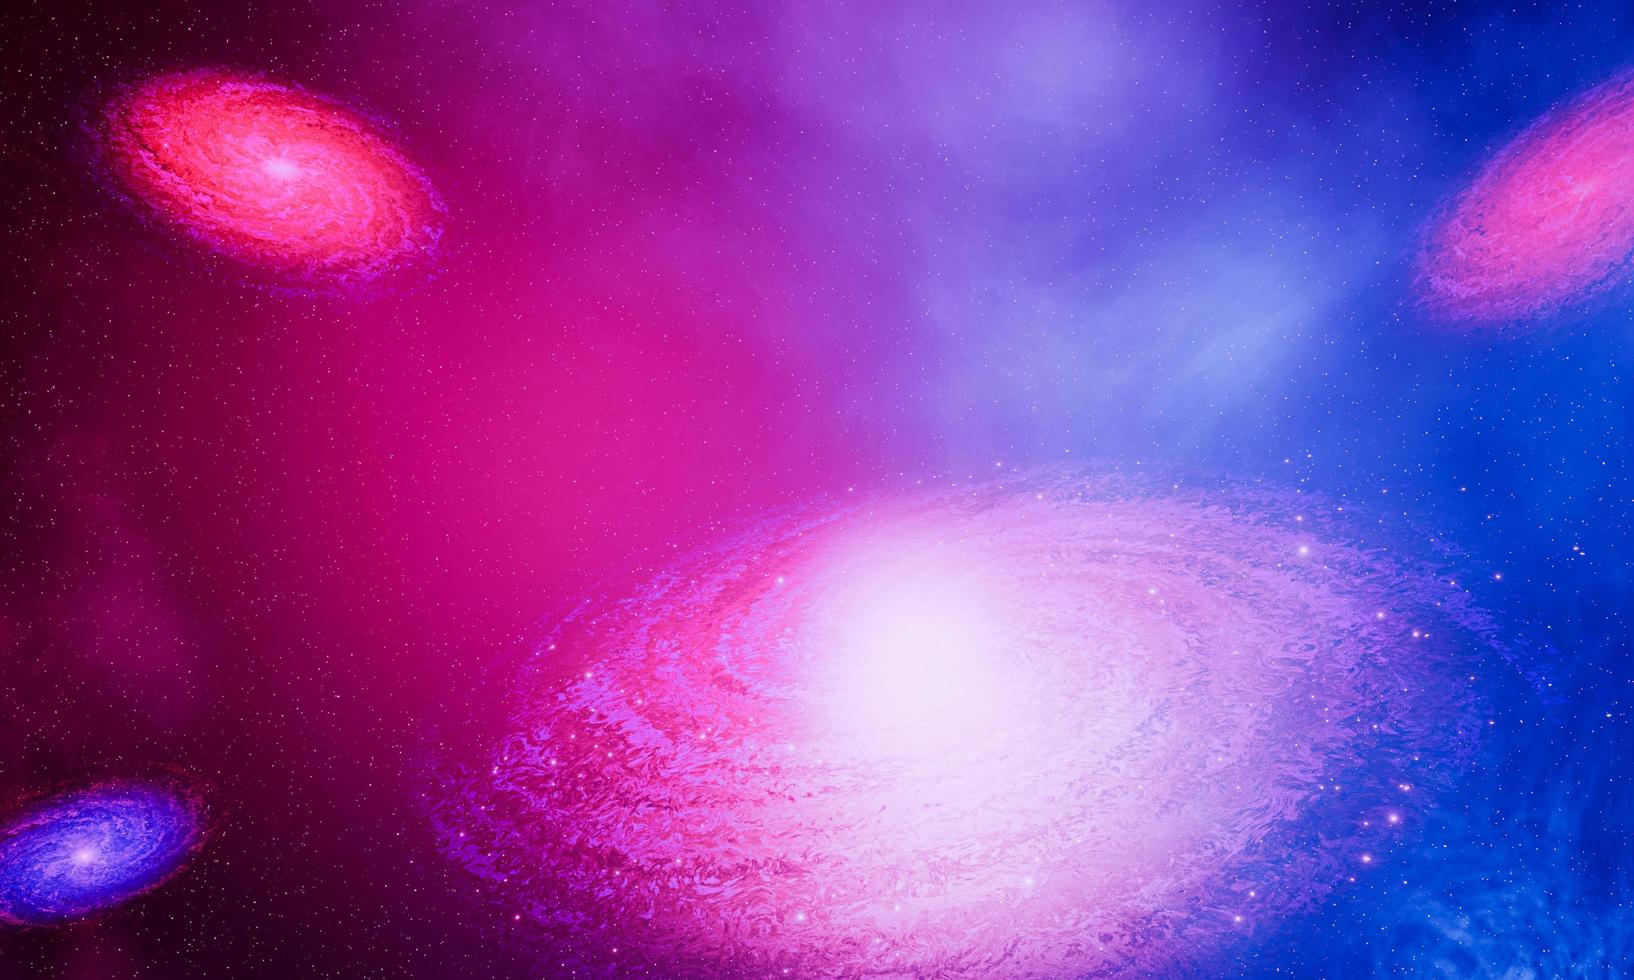 Galaxy or nebular in space with many stars. Space image for use as a background or wallpaper of mobile, smartphone, or computer. 3D Rendering photo